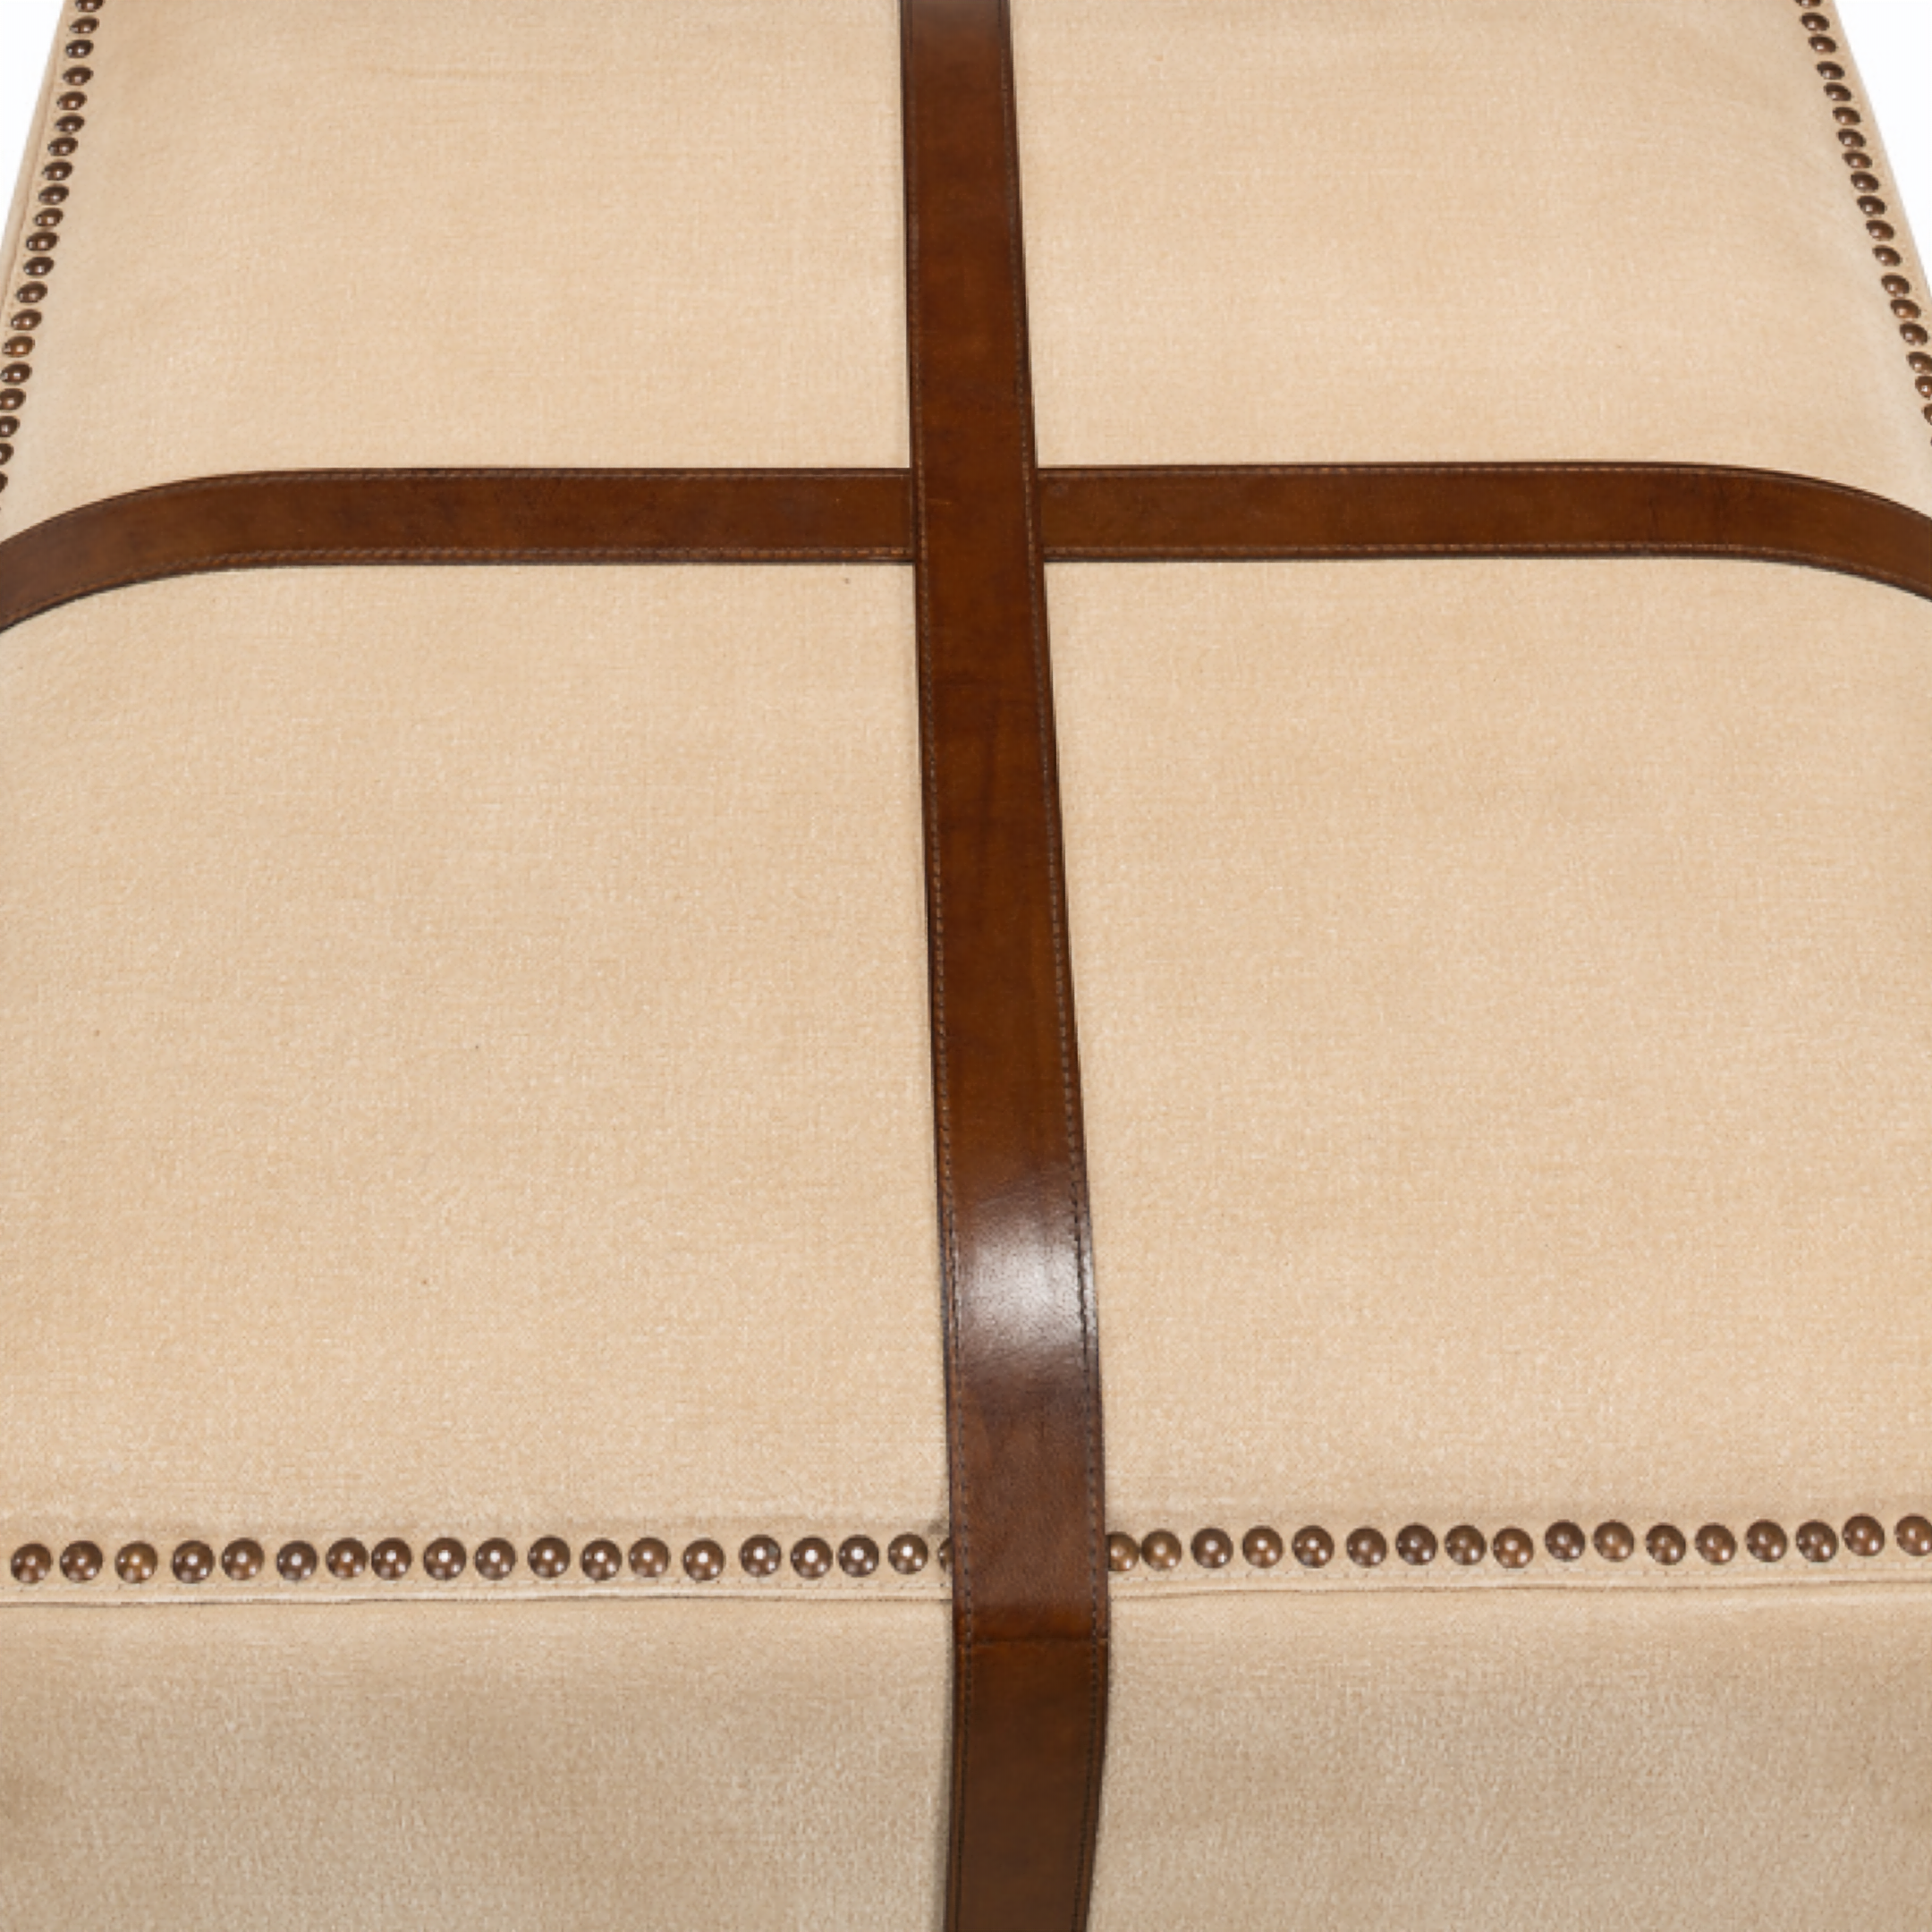 Strap Canvas & Leather Stool